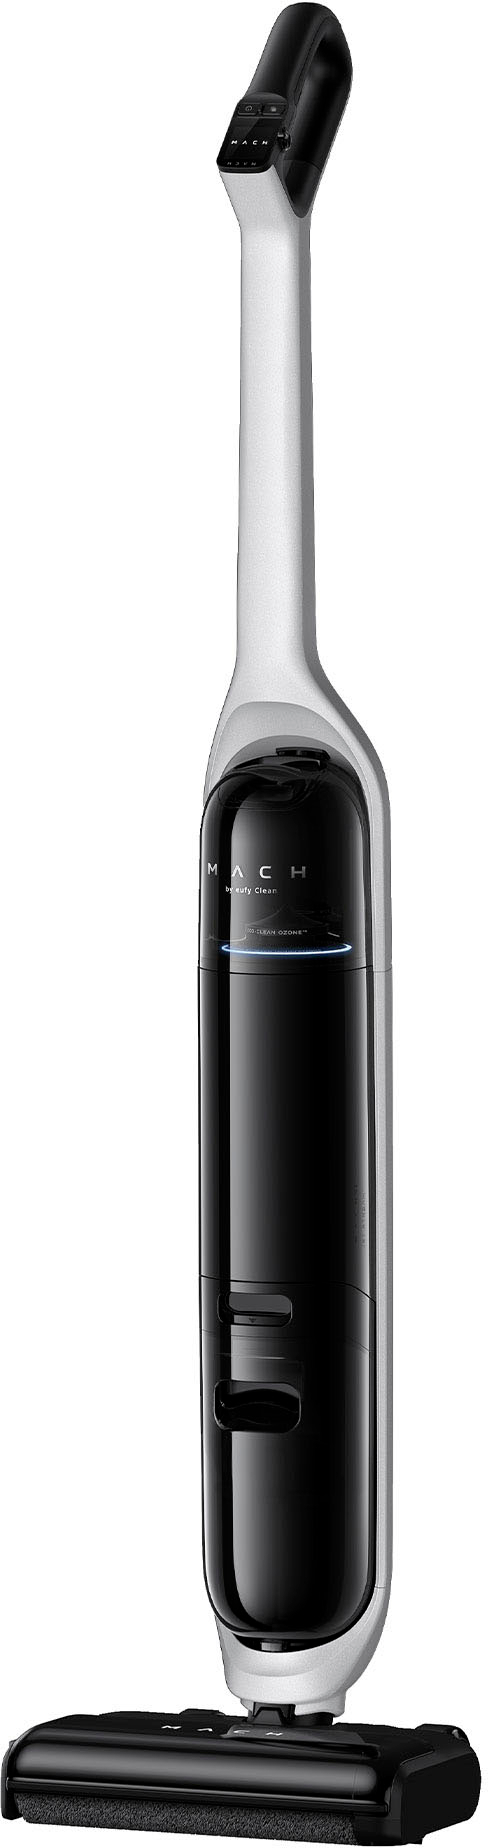 Angle View: eufy Clean - MACH V1 All-in-One Cordless Upright Vacuum with Always-Clean Mop - Black